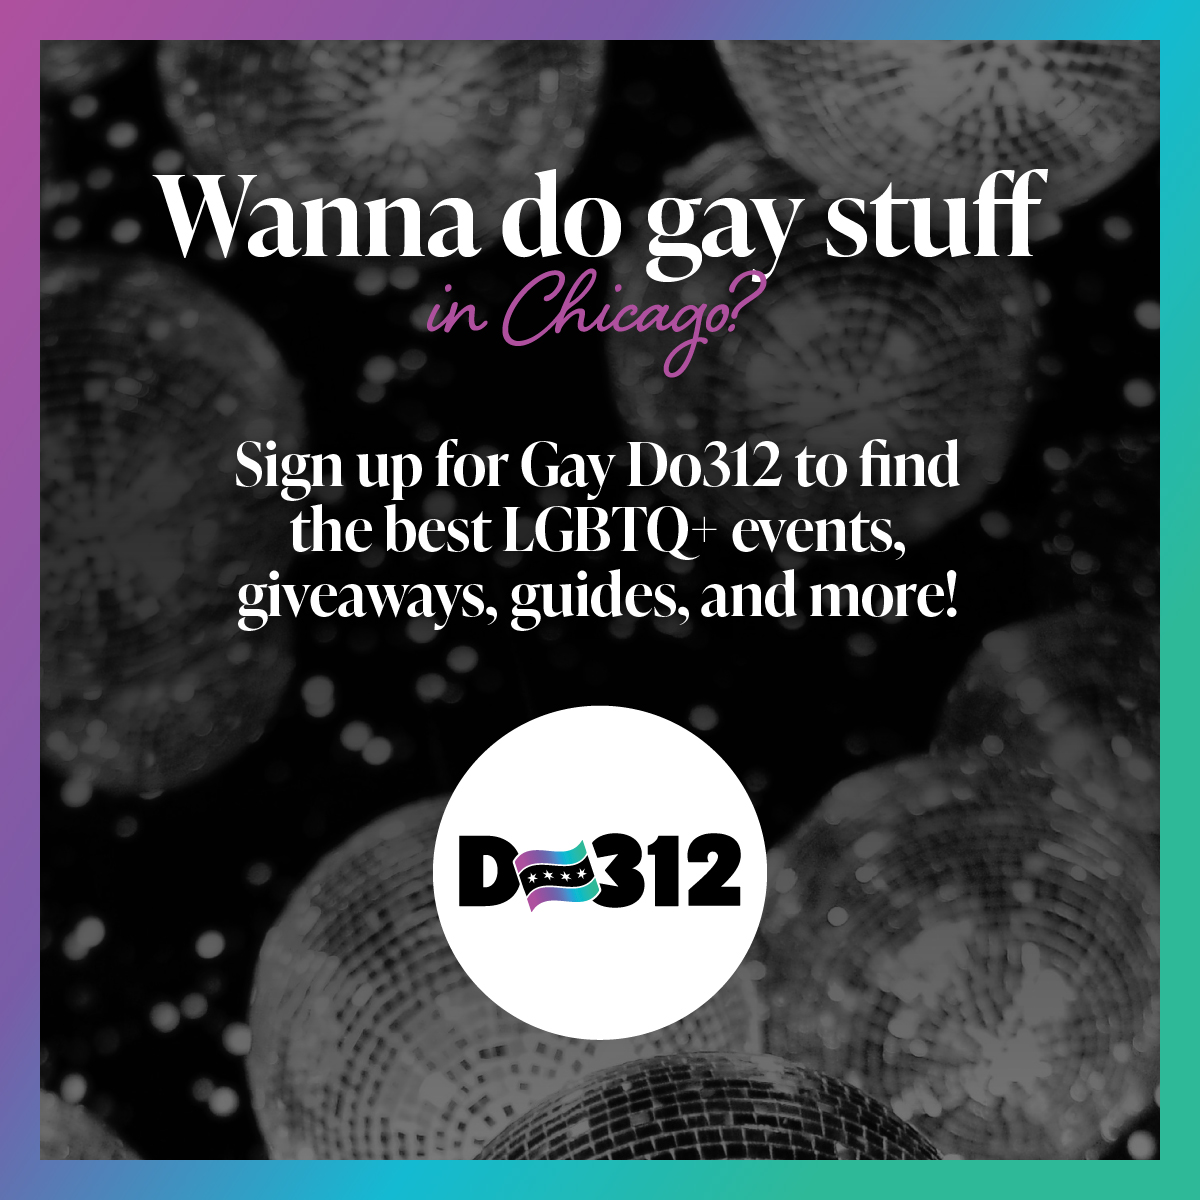 Looking for LGBTQ+ events and giveaways in Chicago? Sign up for Gay Do312's newsletter for weekly updates.